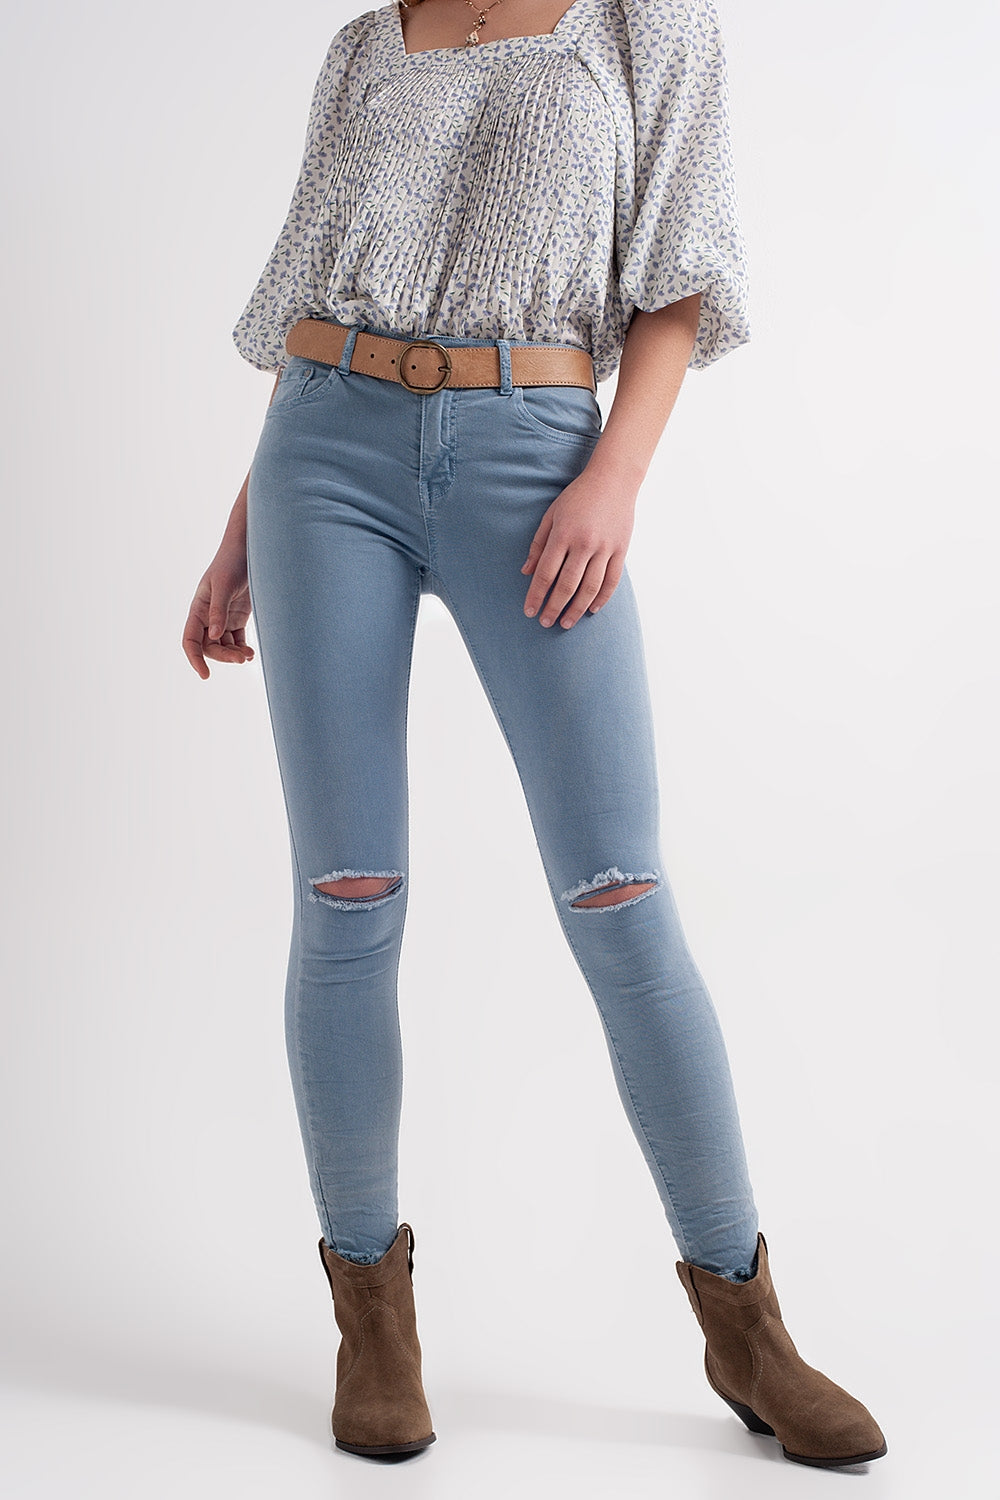 Jean with distressed knee in blue